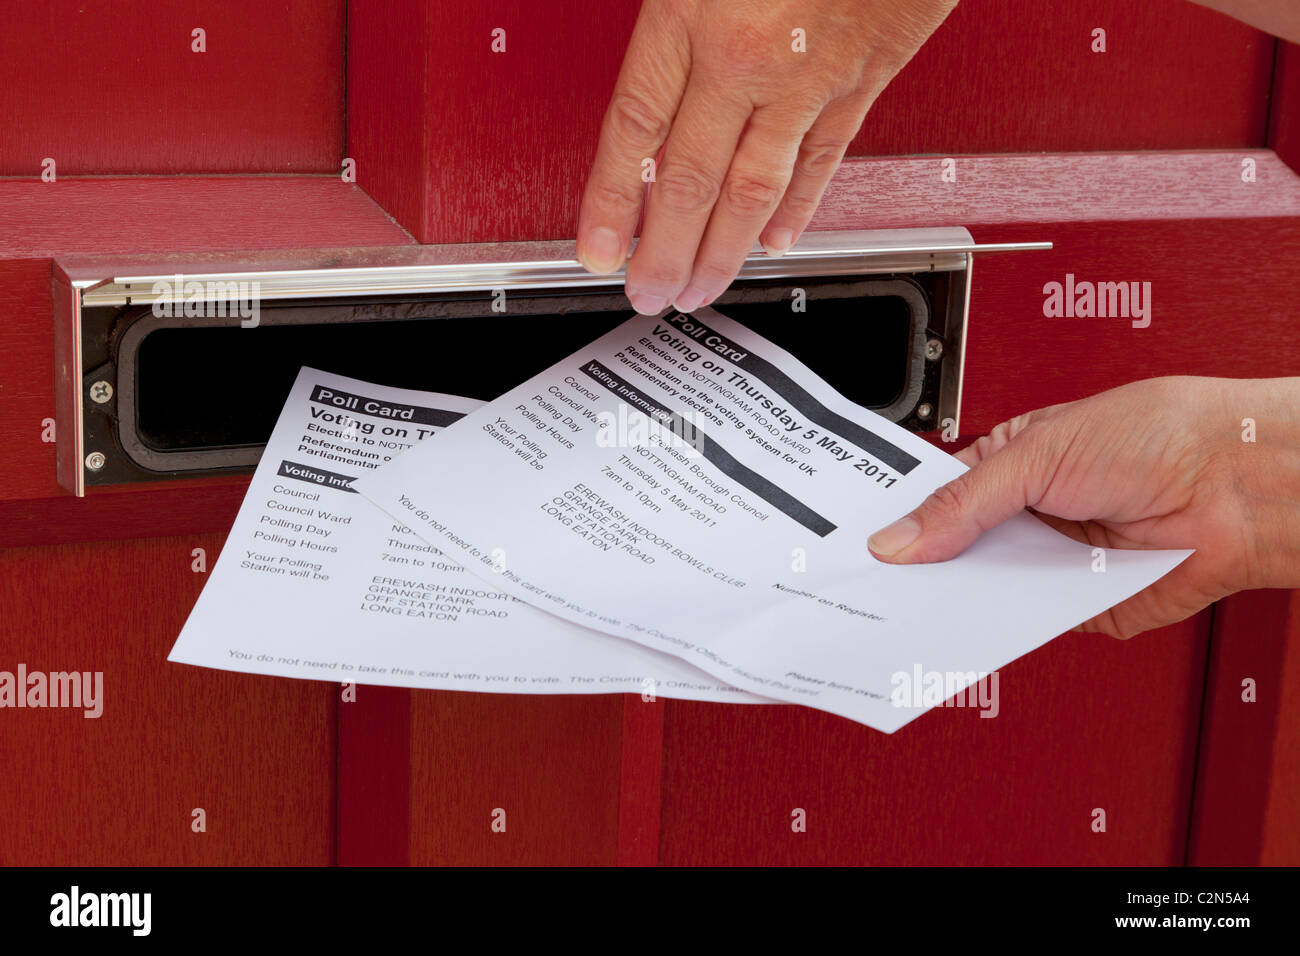 Polling cards being pushed through a front door letter box for the Av Referendum on May 5th 2011 England UK Stock Photo